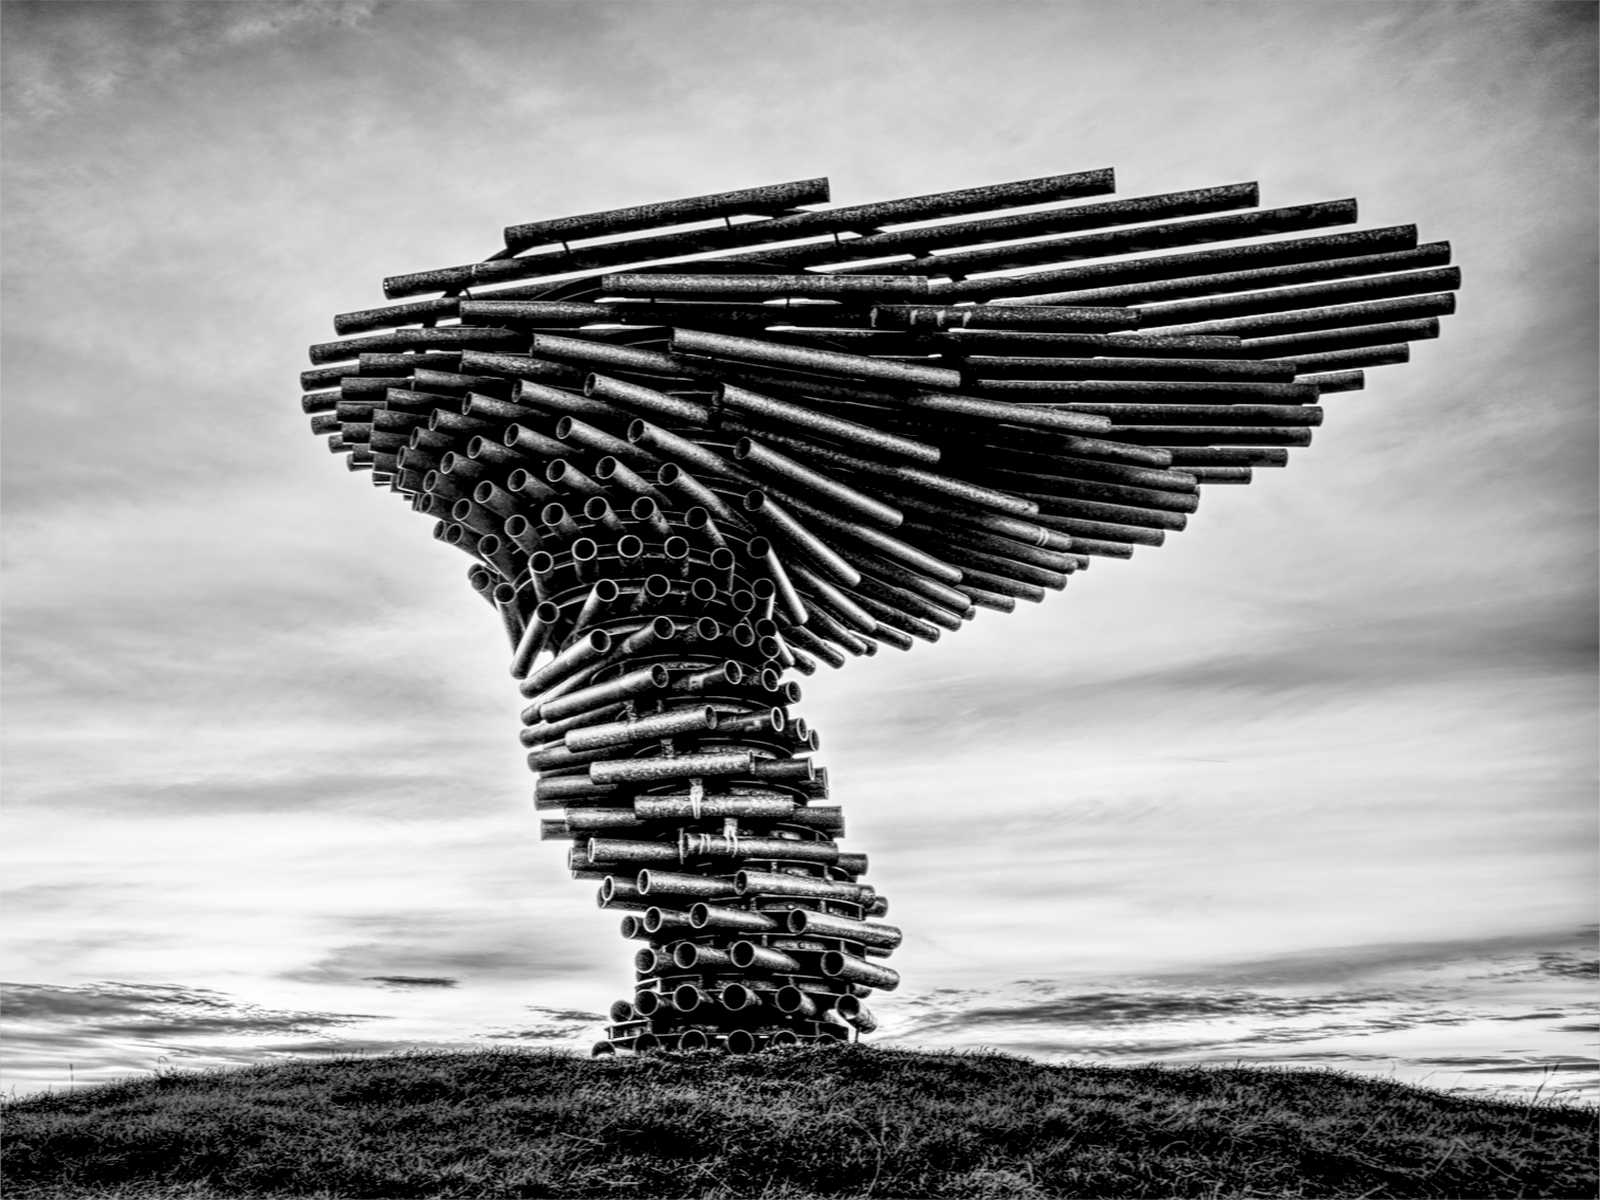 Image of The Singing Ringing Tree by stefan pankow